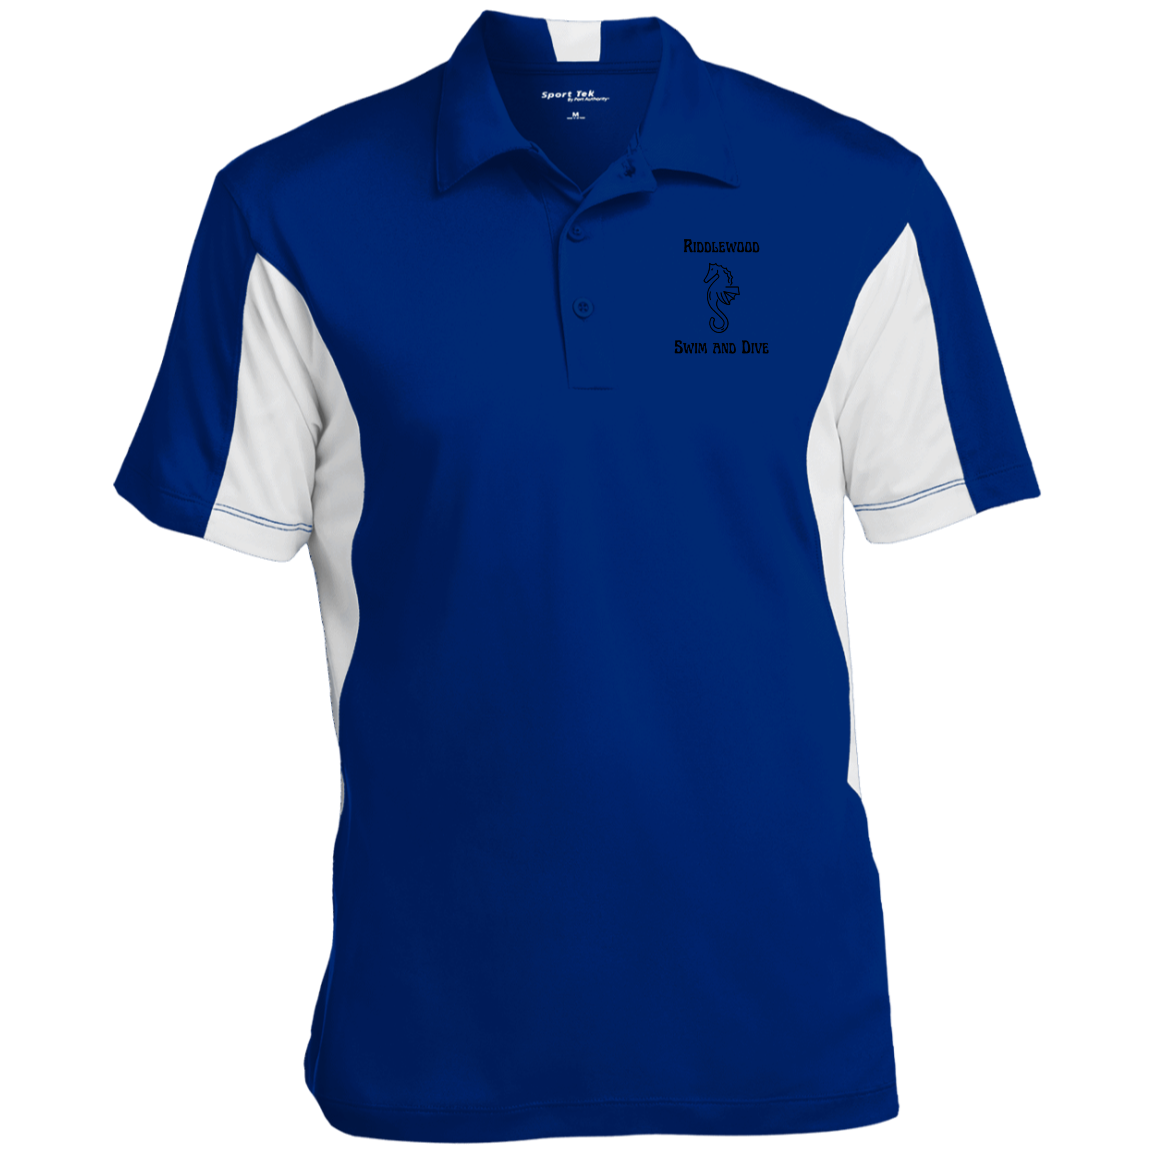 Riddlewood swim and dive Team Store Men's Colorblock Performance Polo